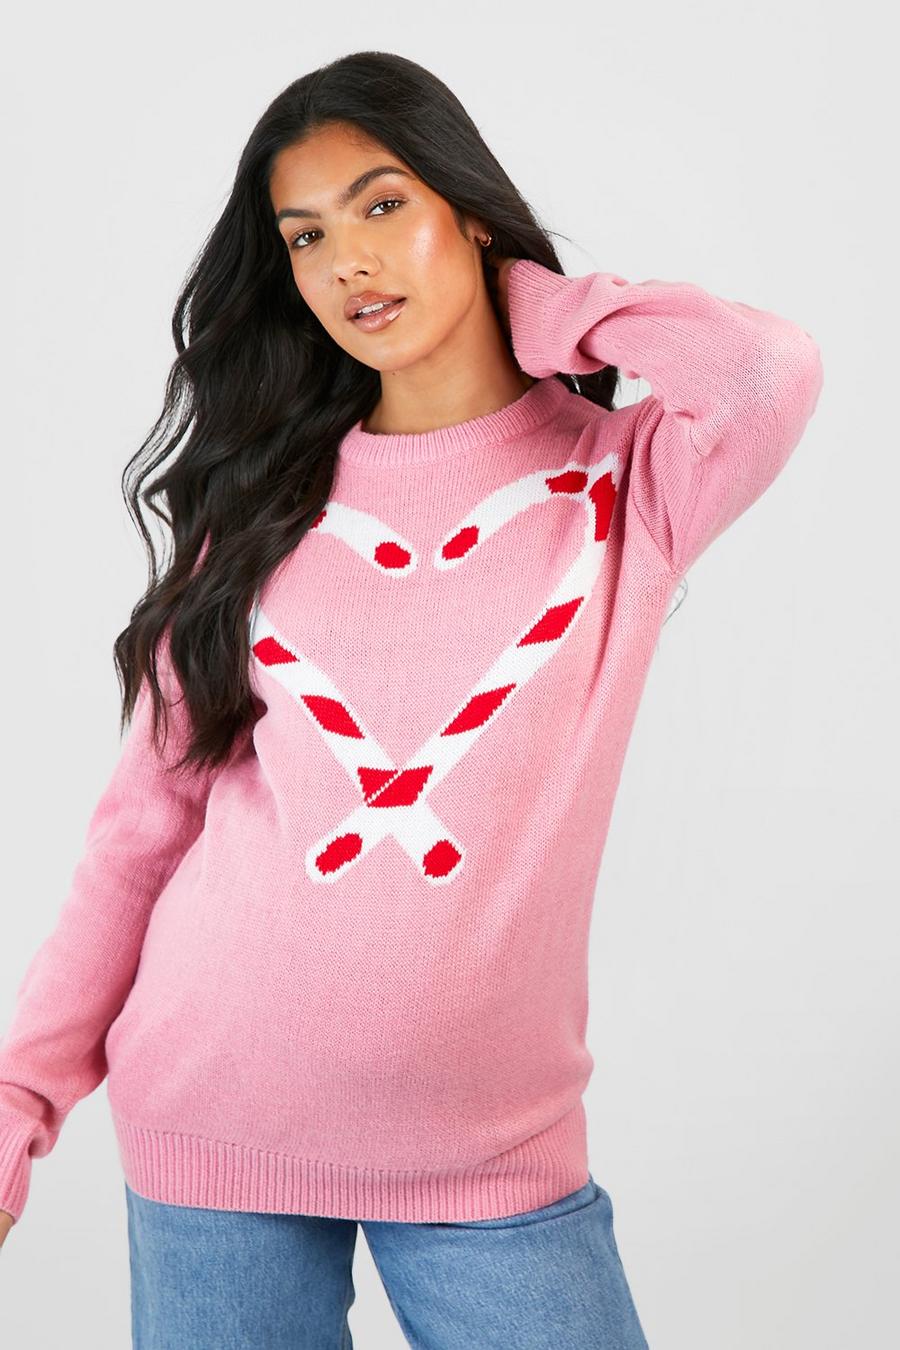 Baby pink Maternity Candy Cane Christmas Sweater